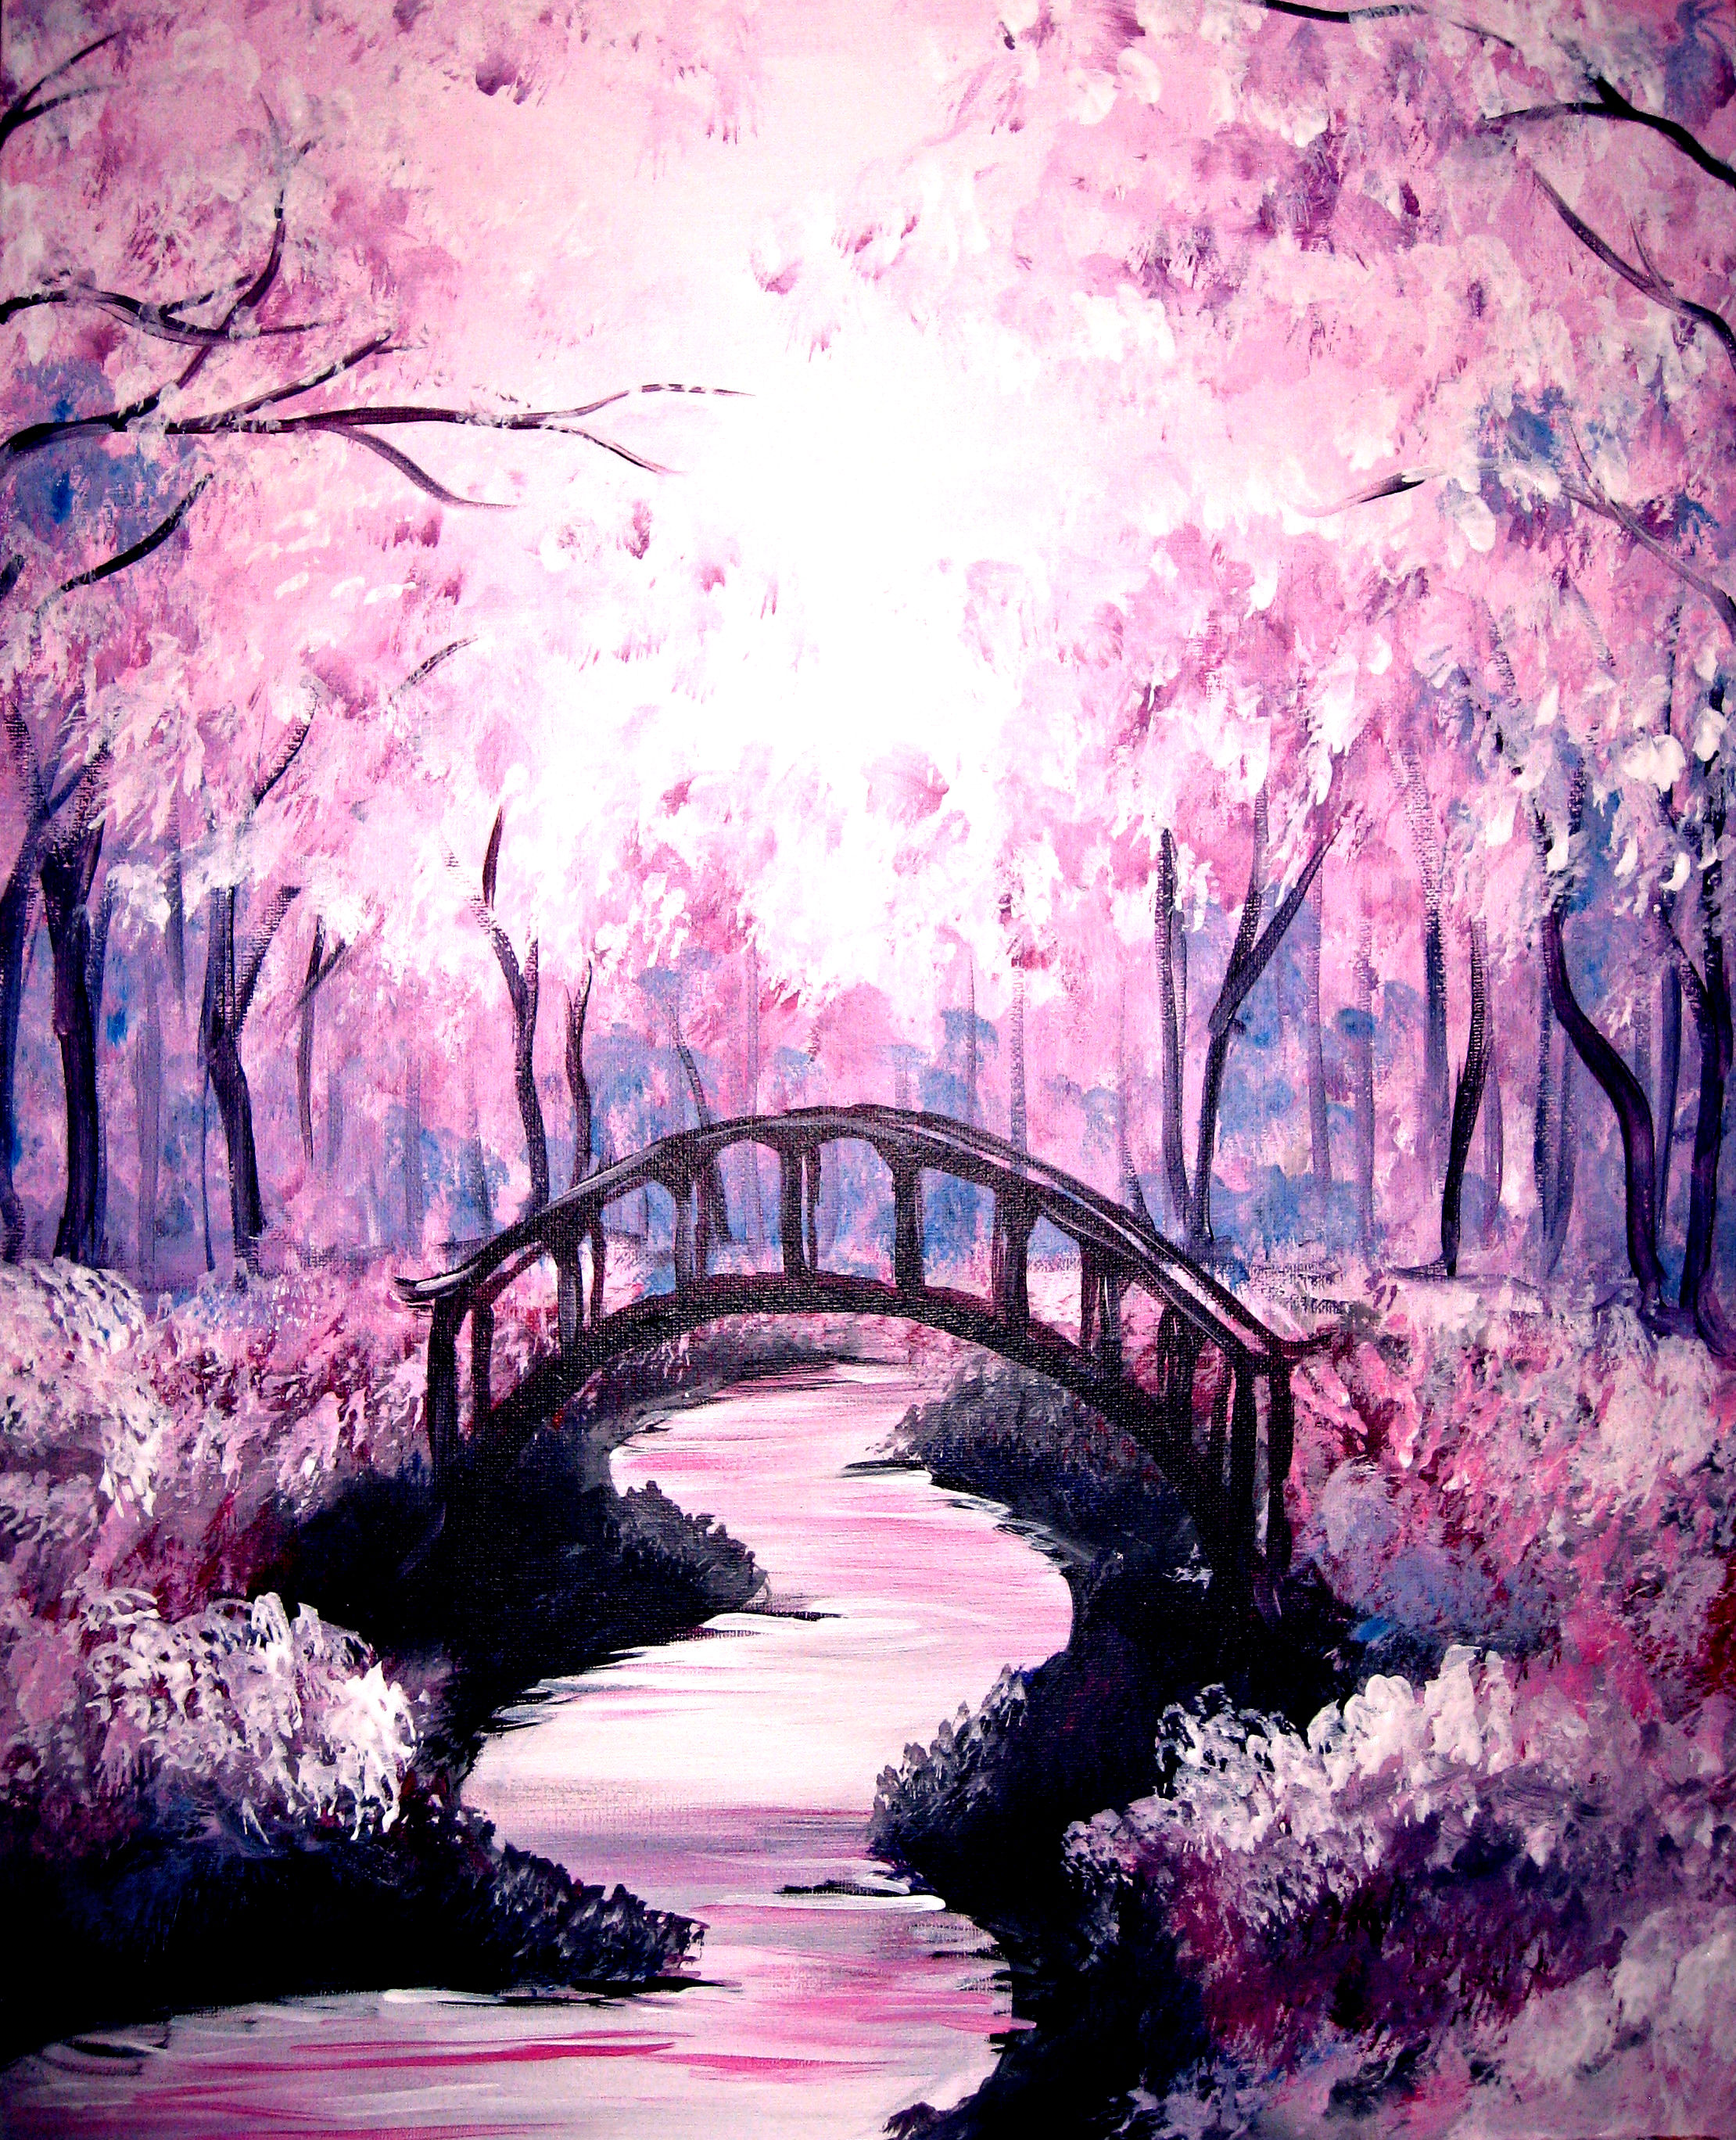 A Bridge under the Cherry Blossoms paint nite project by Yaymaker